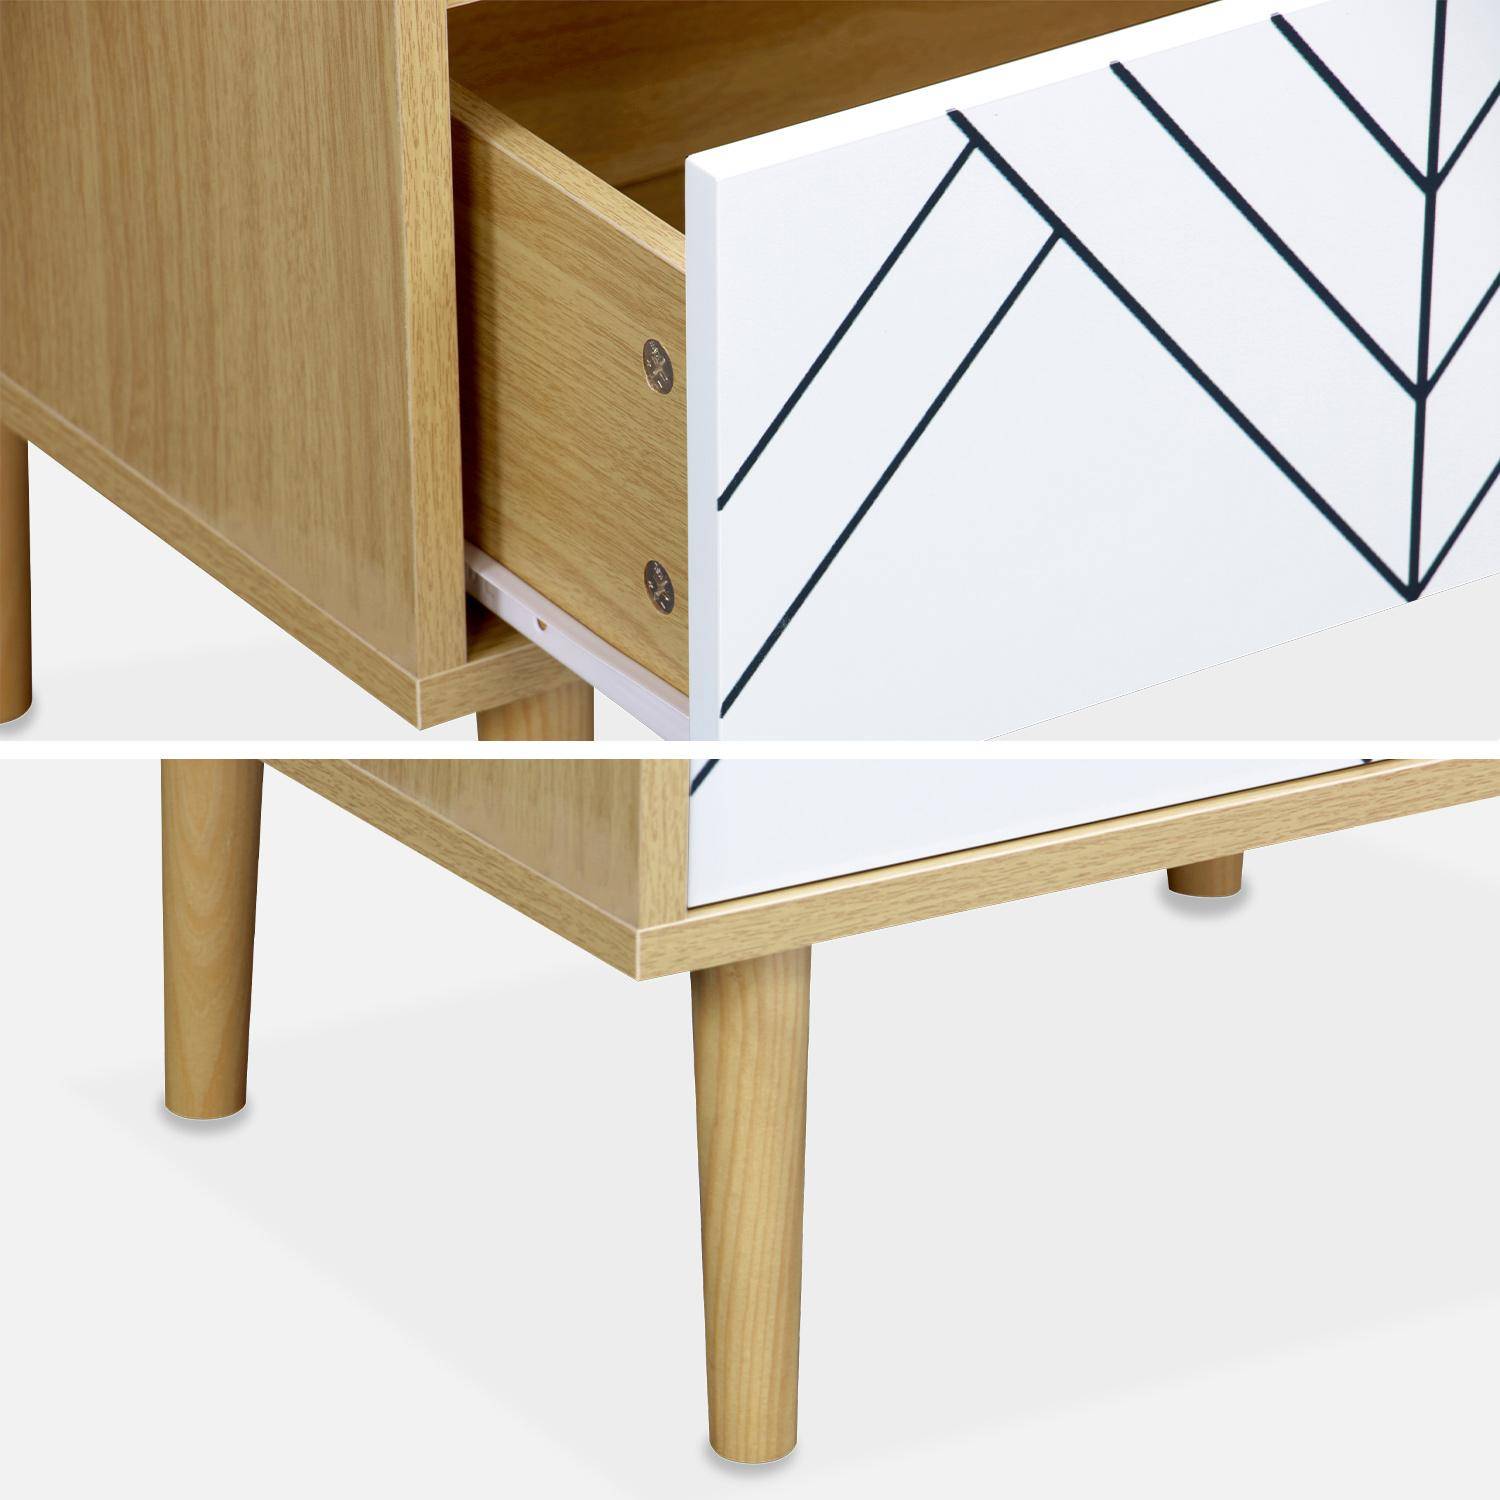 Pair of wood-effect bedside tables with two drawers, 48x40x59cm - Mika - White,sweeek,Photo7